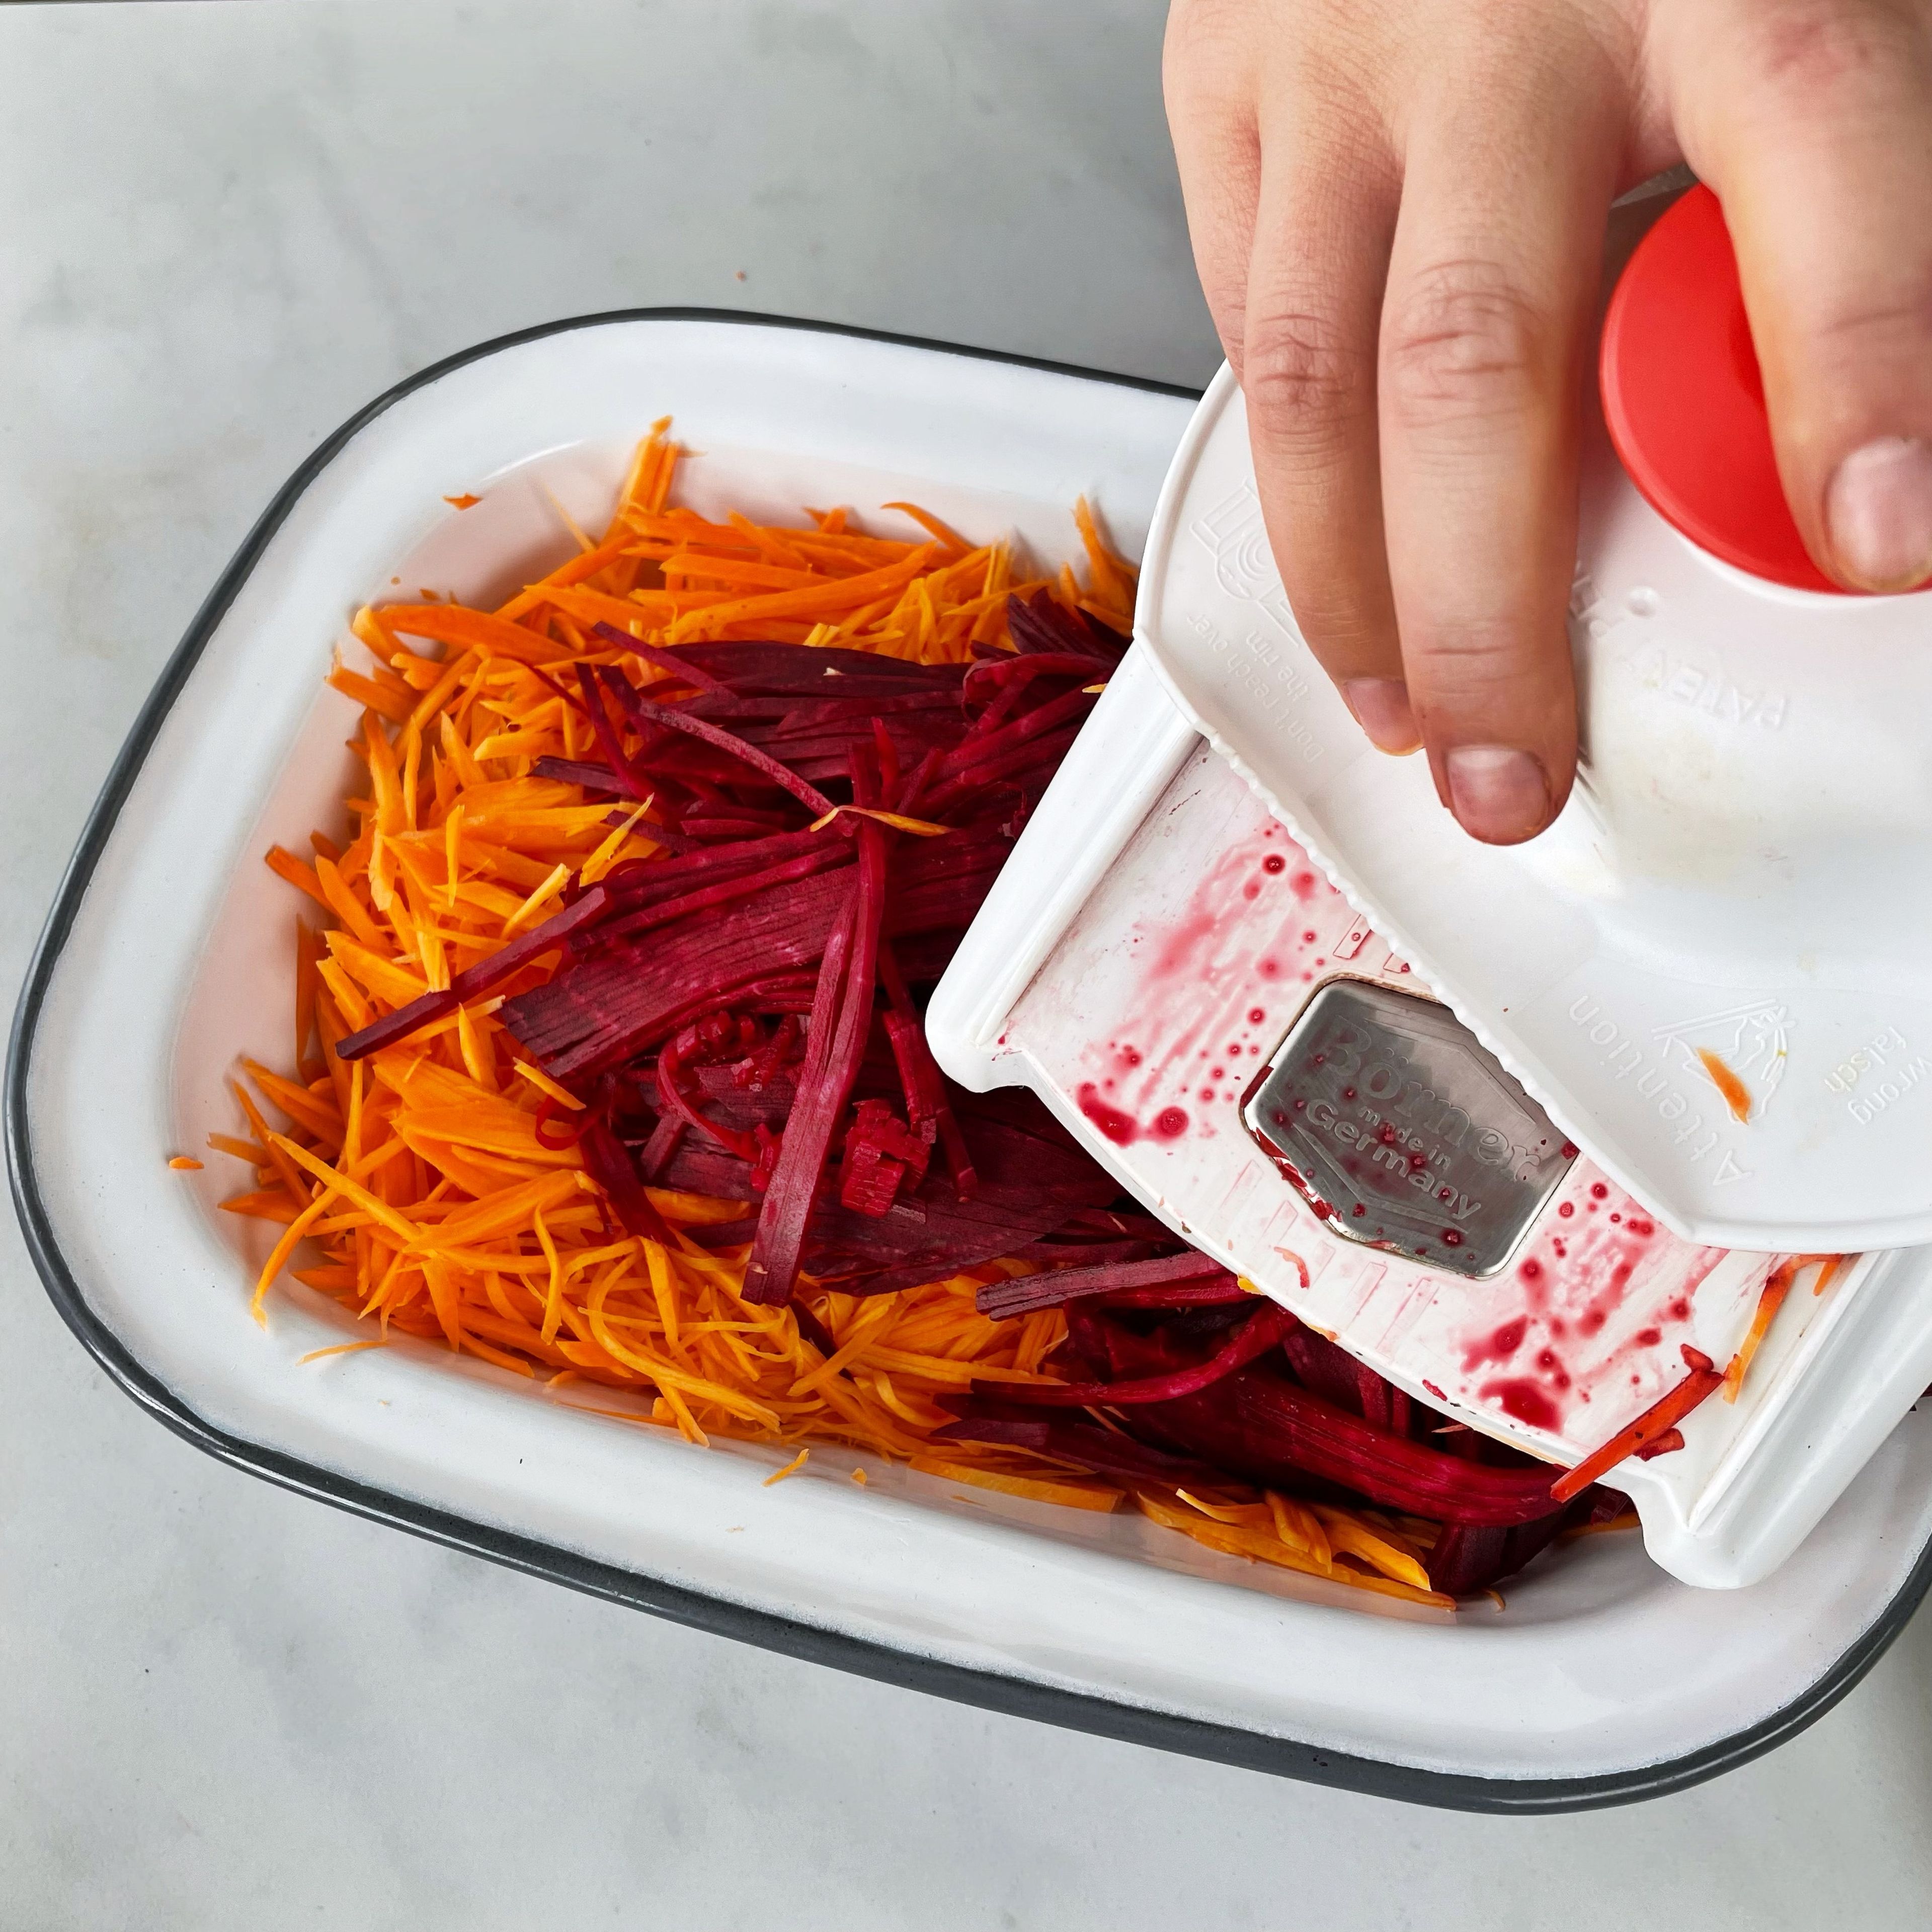 Peel the carrots and red beets and slice into fine julienne. Mix with vinegar, olive oil, chili flakes, salt and pepper and knead briefly with your hands. Then arrange on plates and garnish with the pistachios, cranberries and mint.